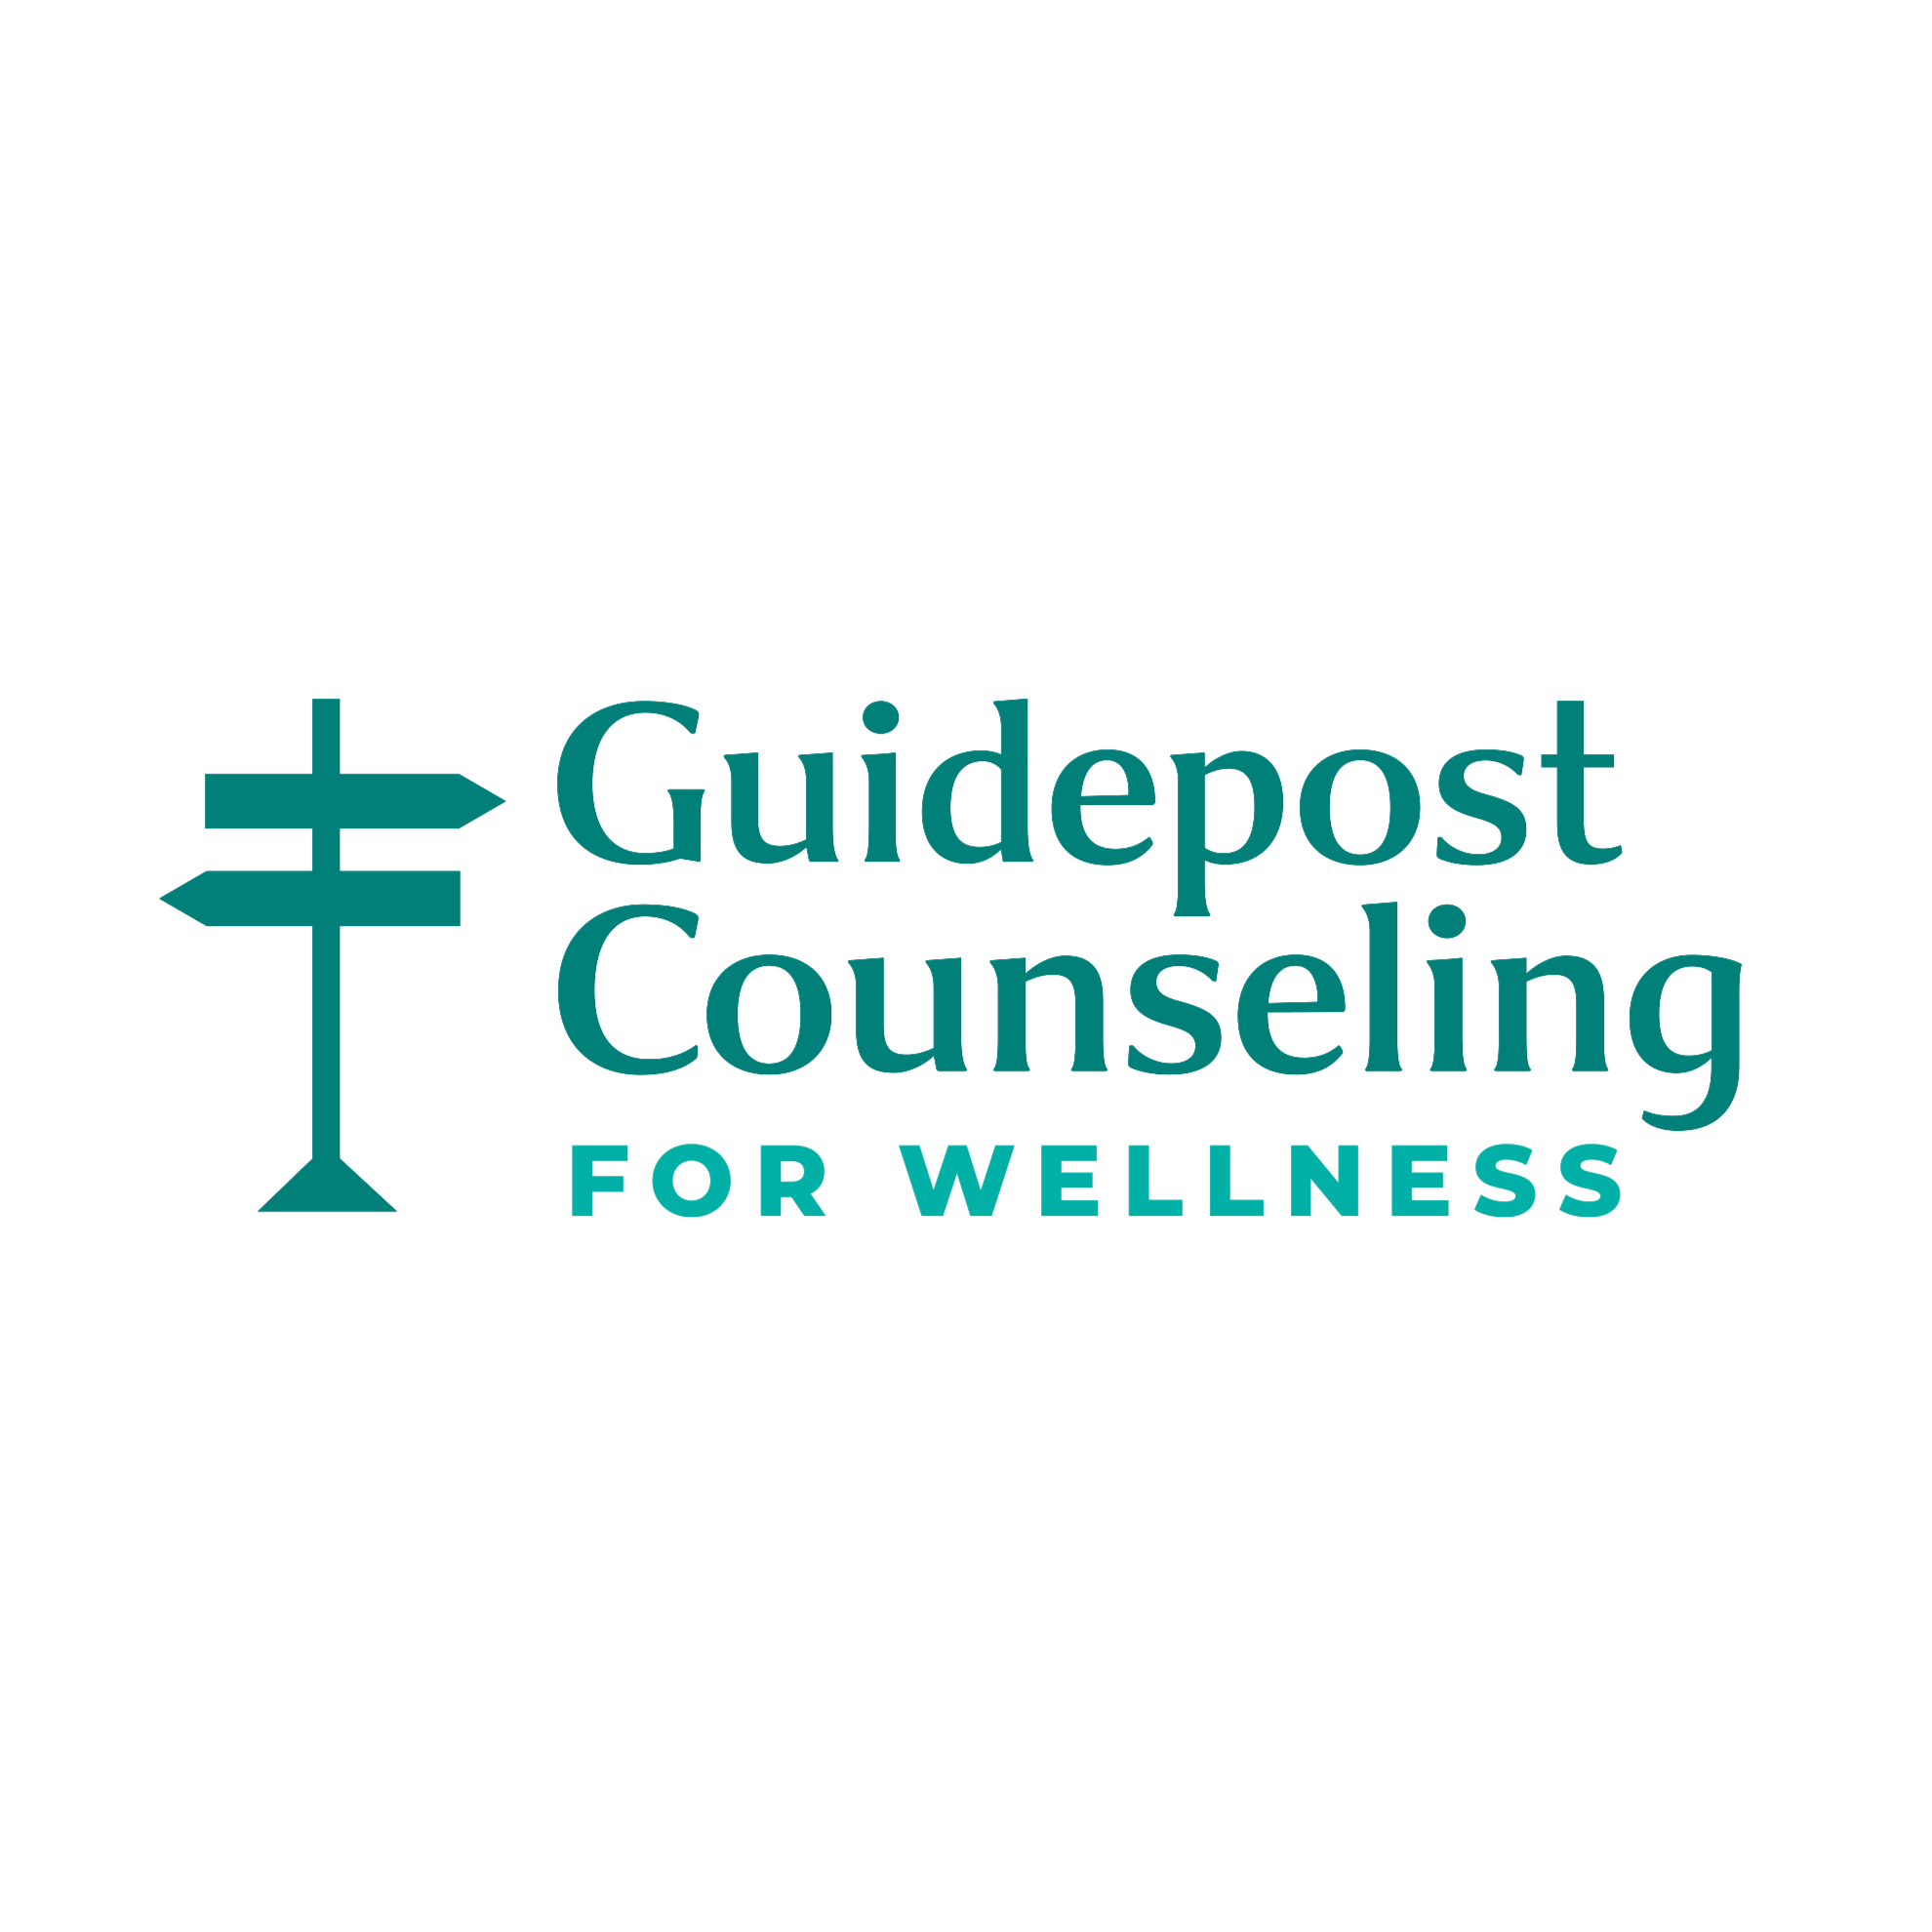 Guidepost Counseling for Wellness - Redding, CA 96001 - (530)691-4577 | ShowMeLocal.com